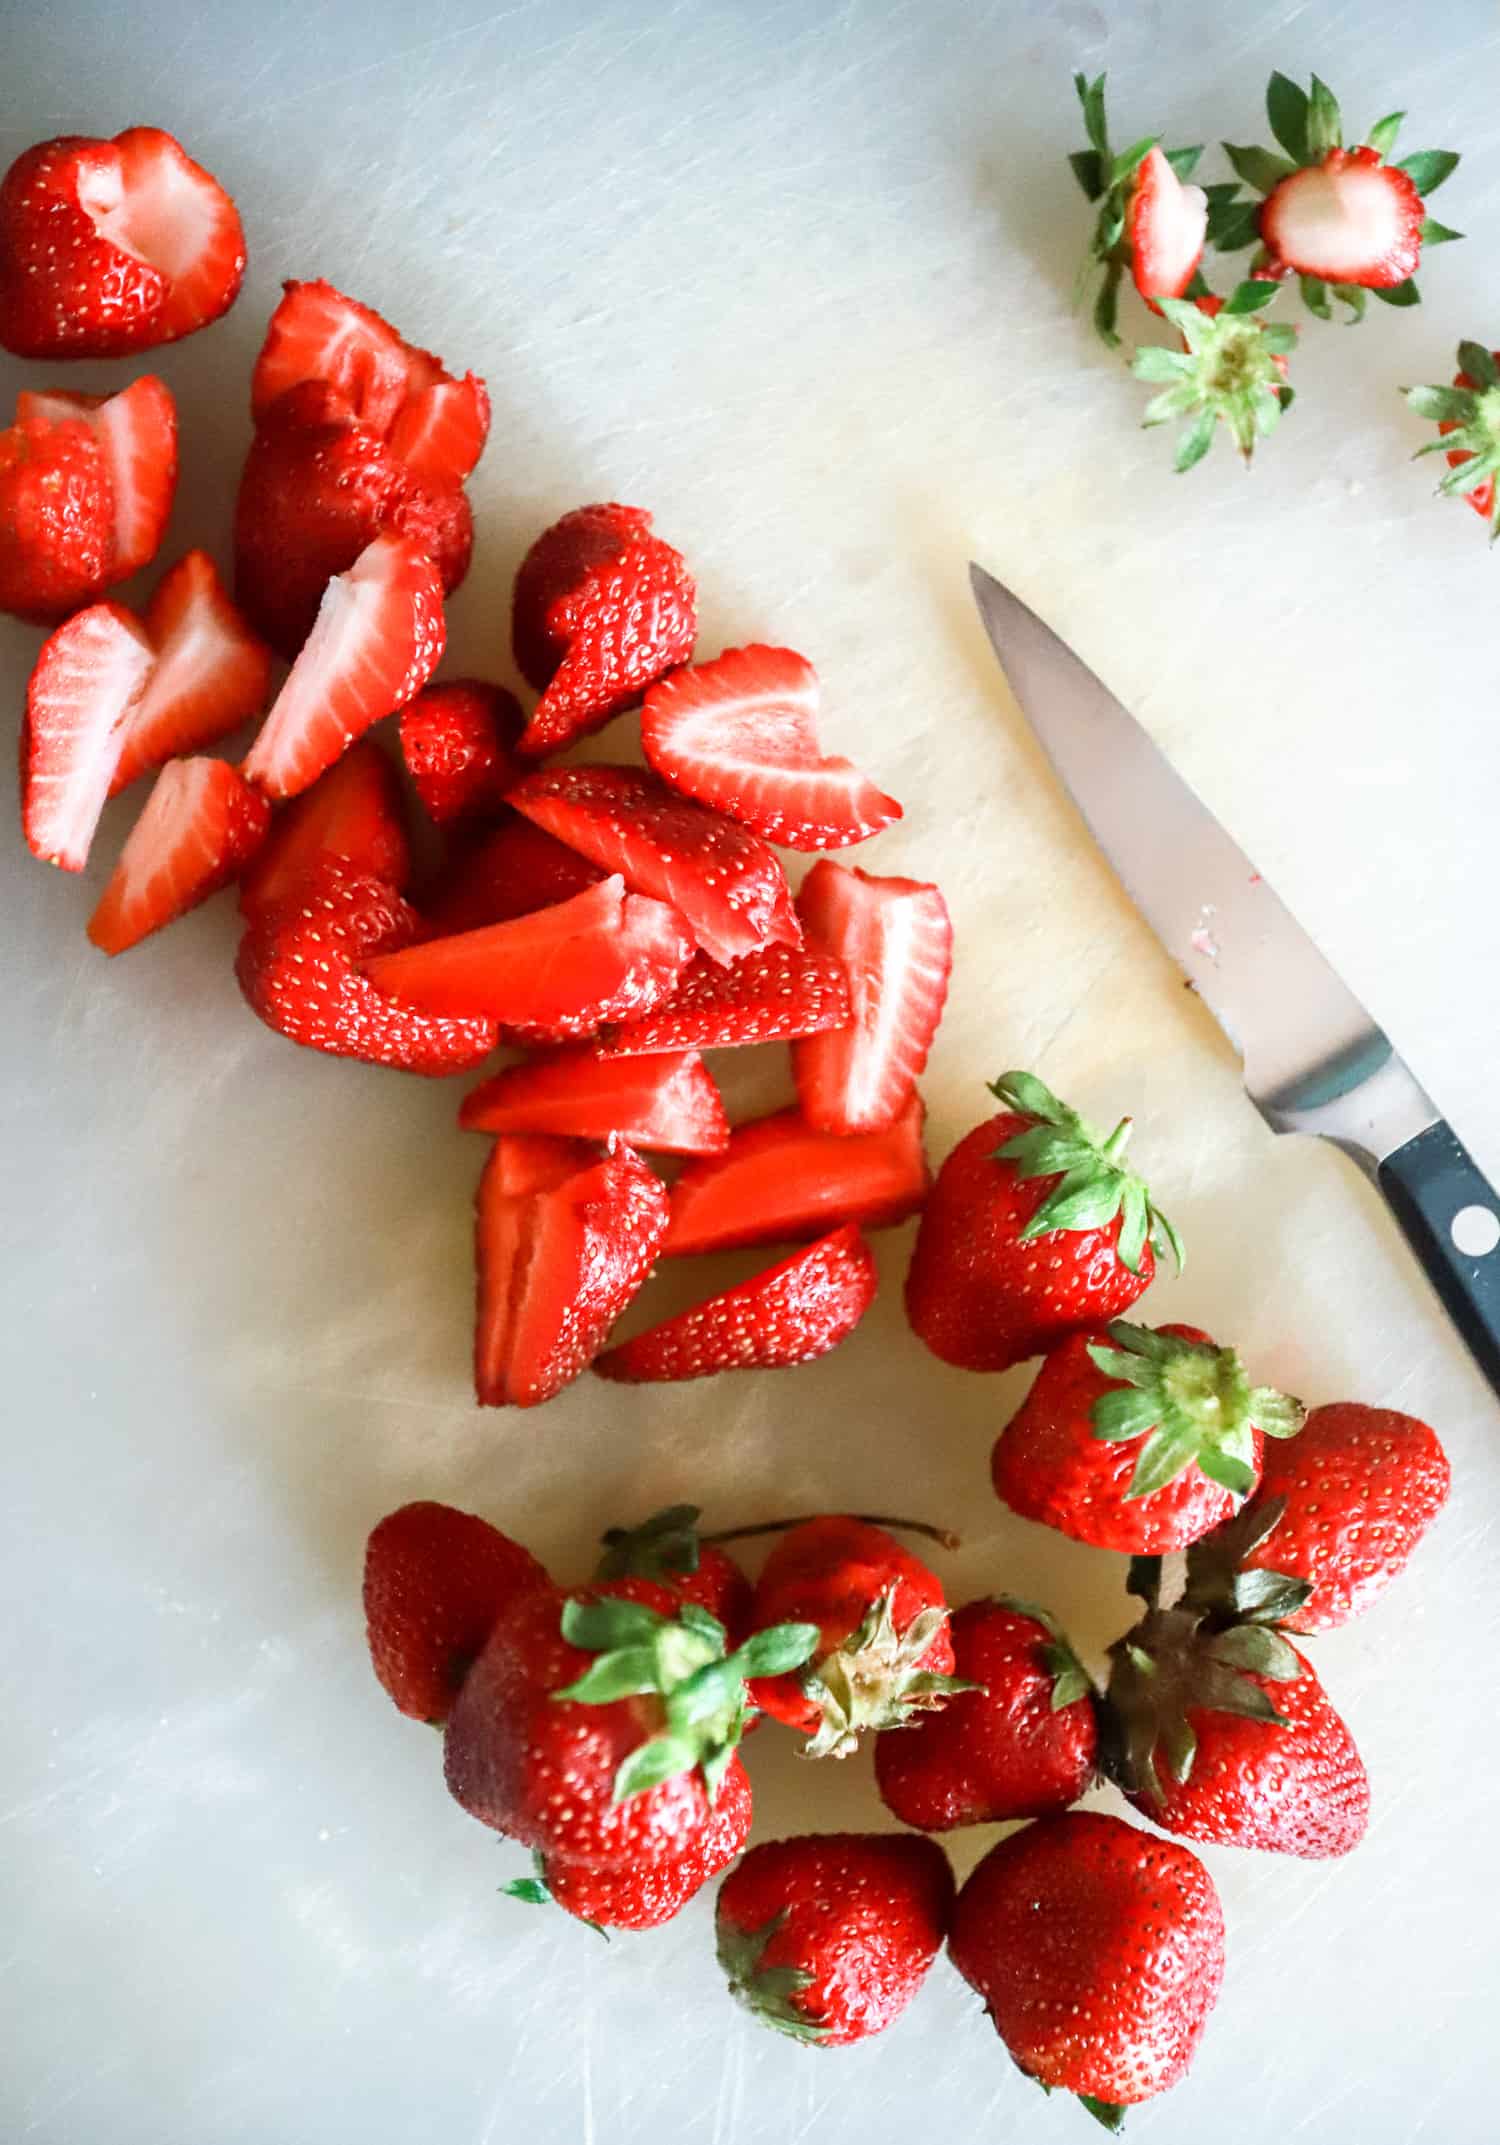 fresh strawberries sliced and hulled with knife